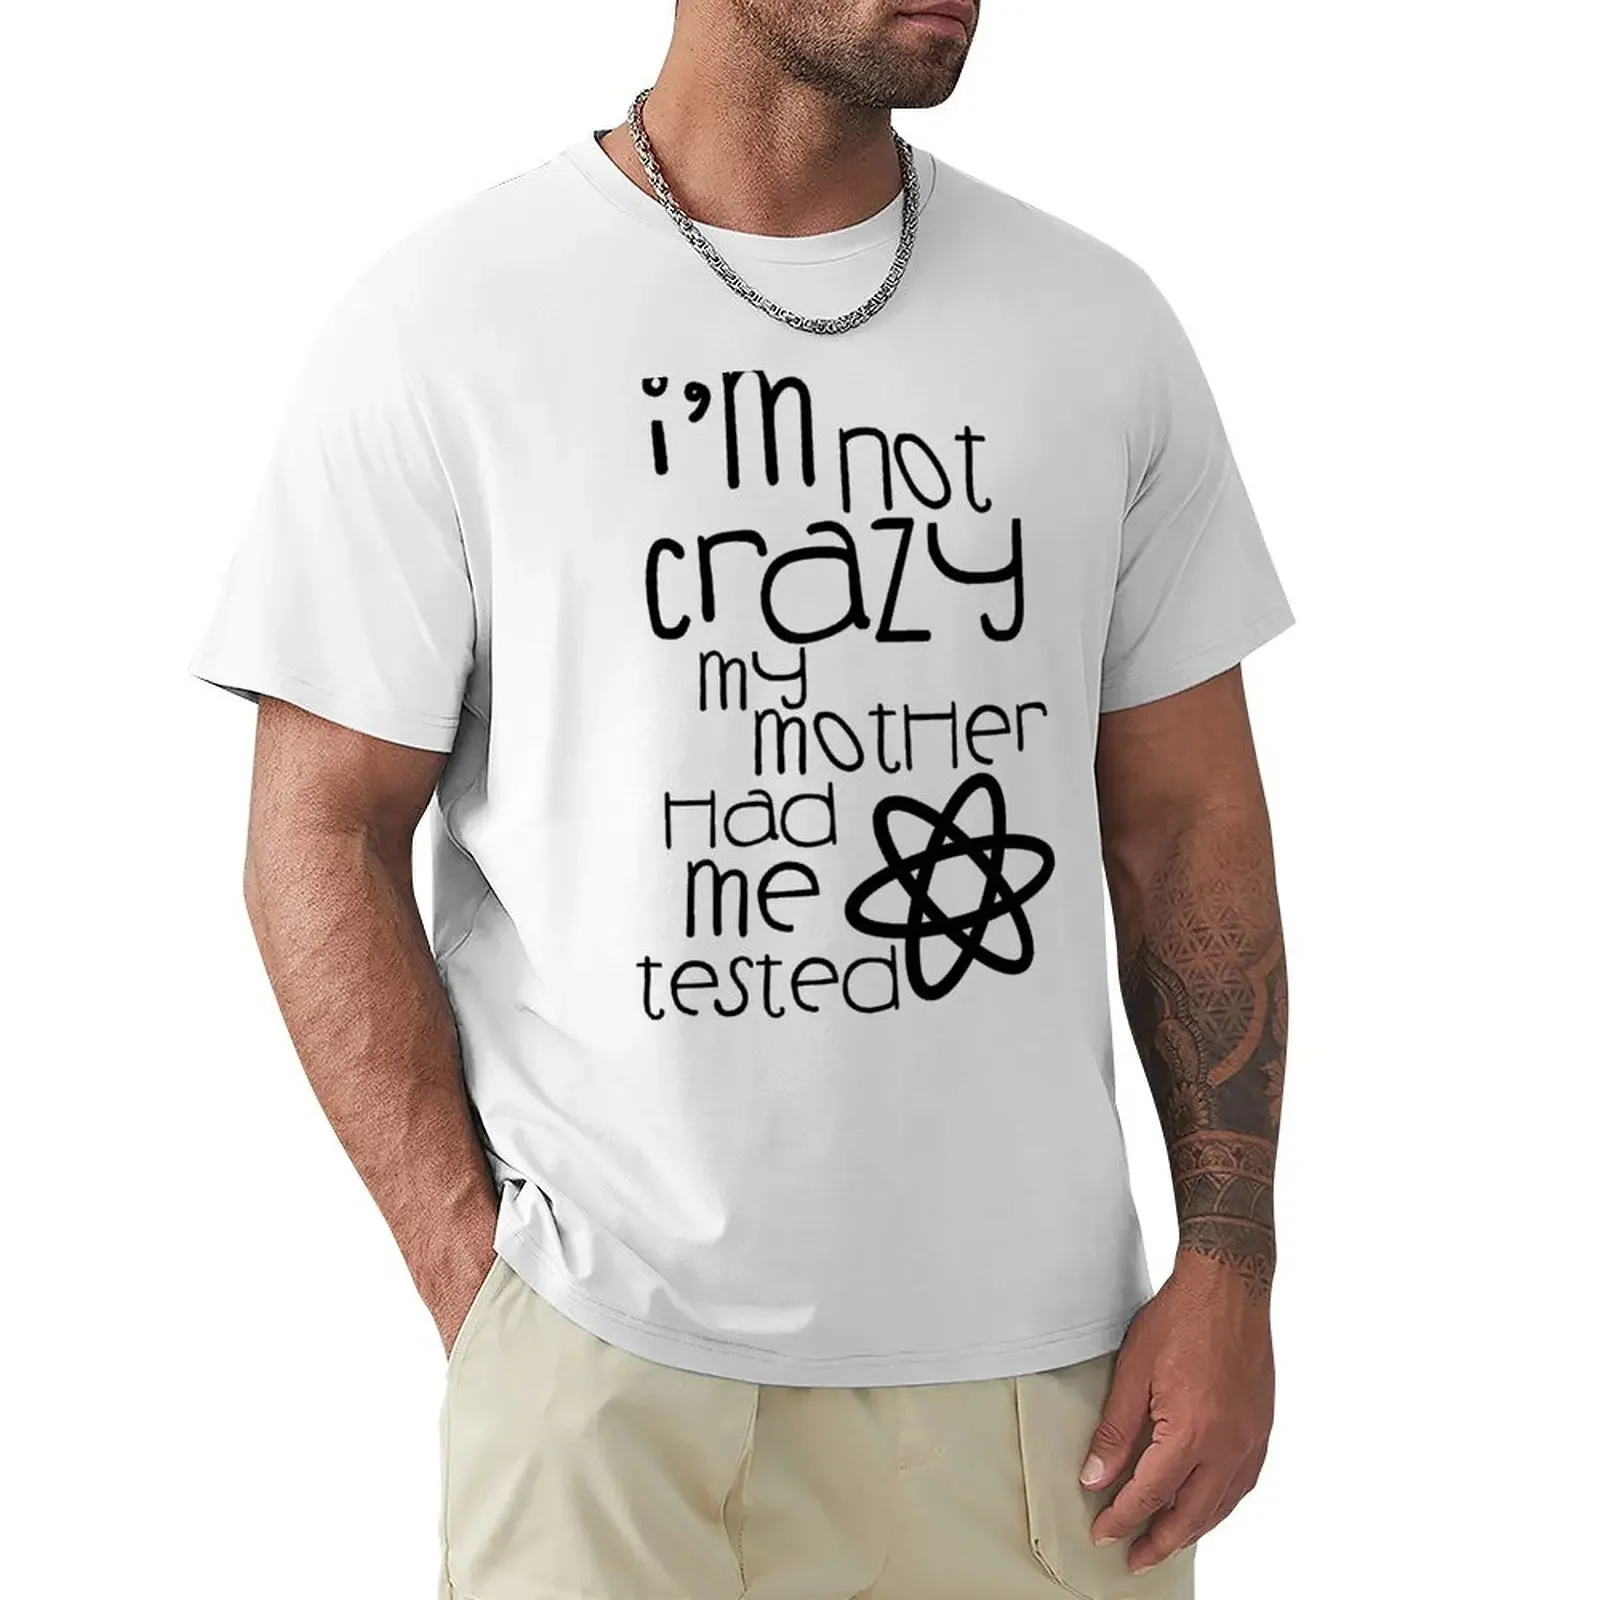 

I'm not crazy, my mother had me tested. T-shirt summer top anime clothes men t shirts